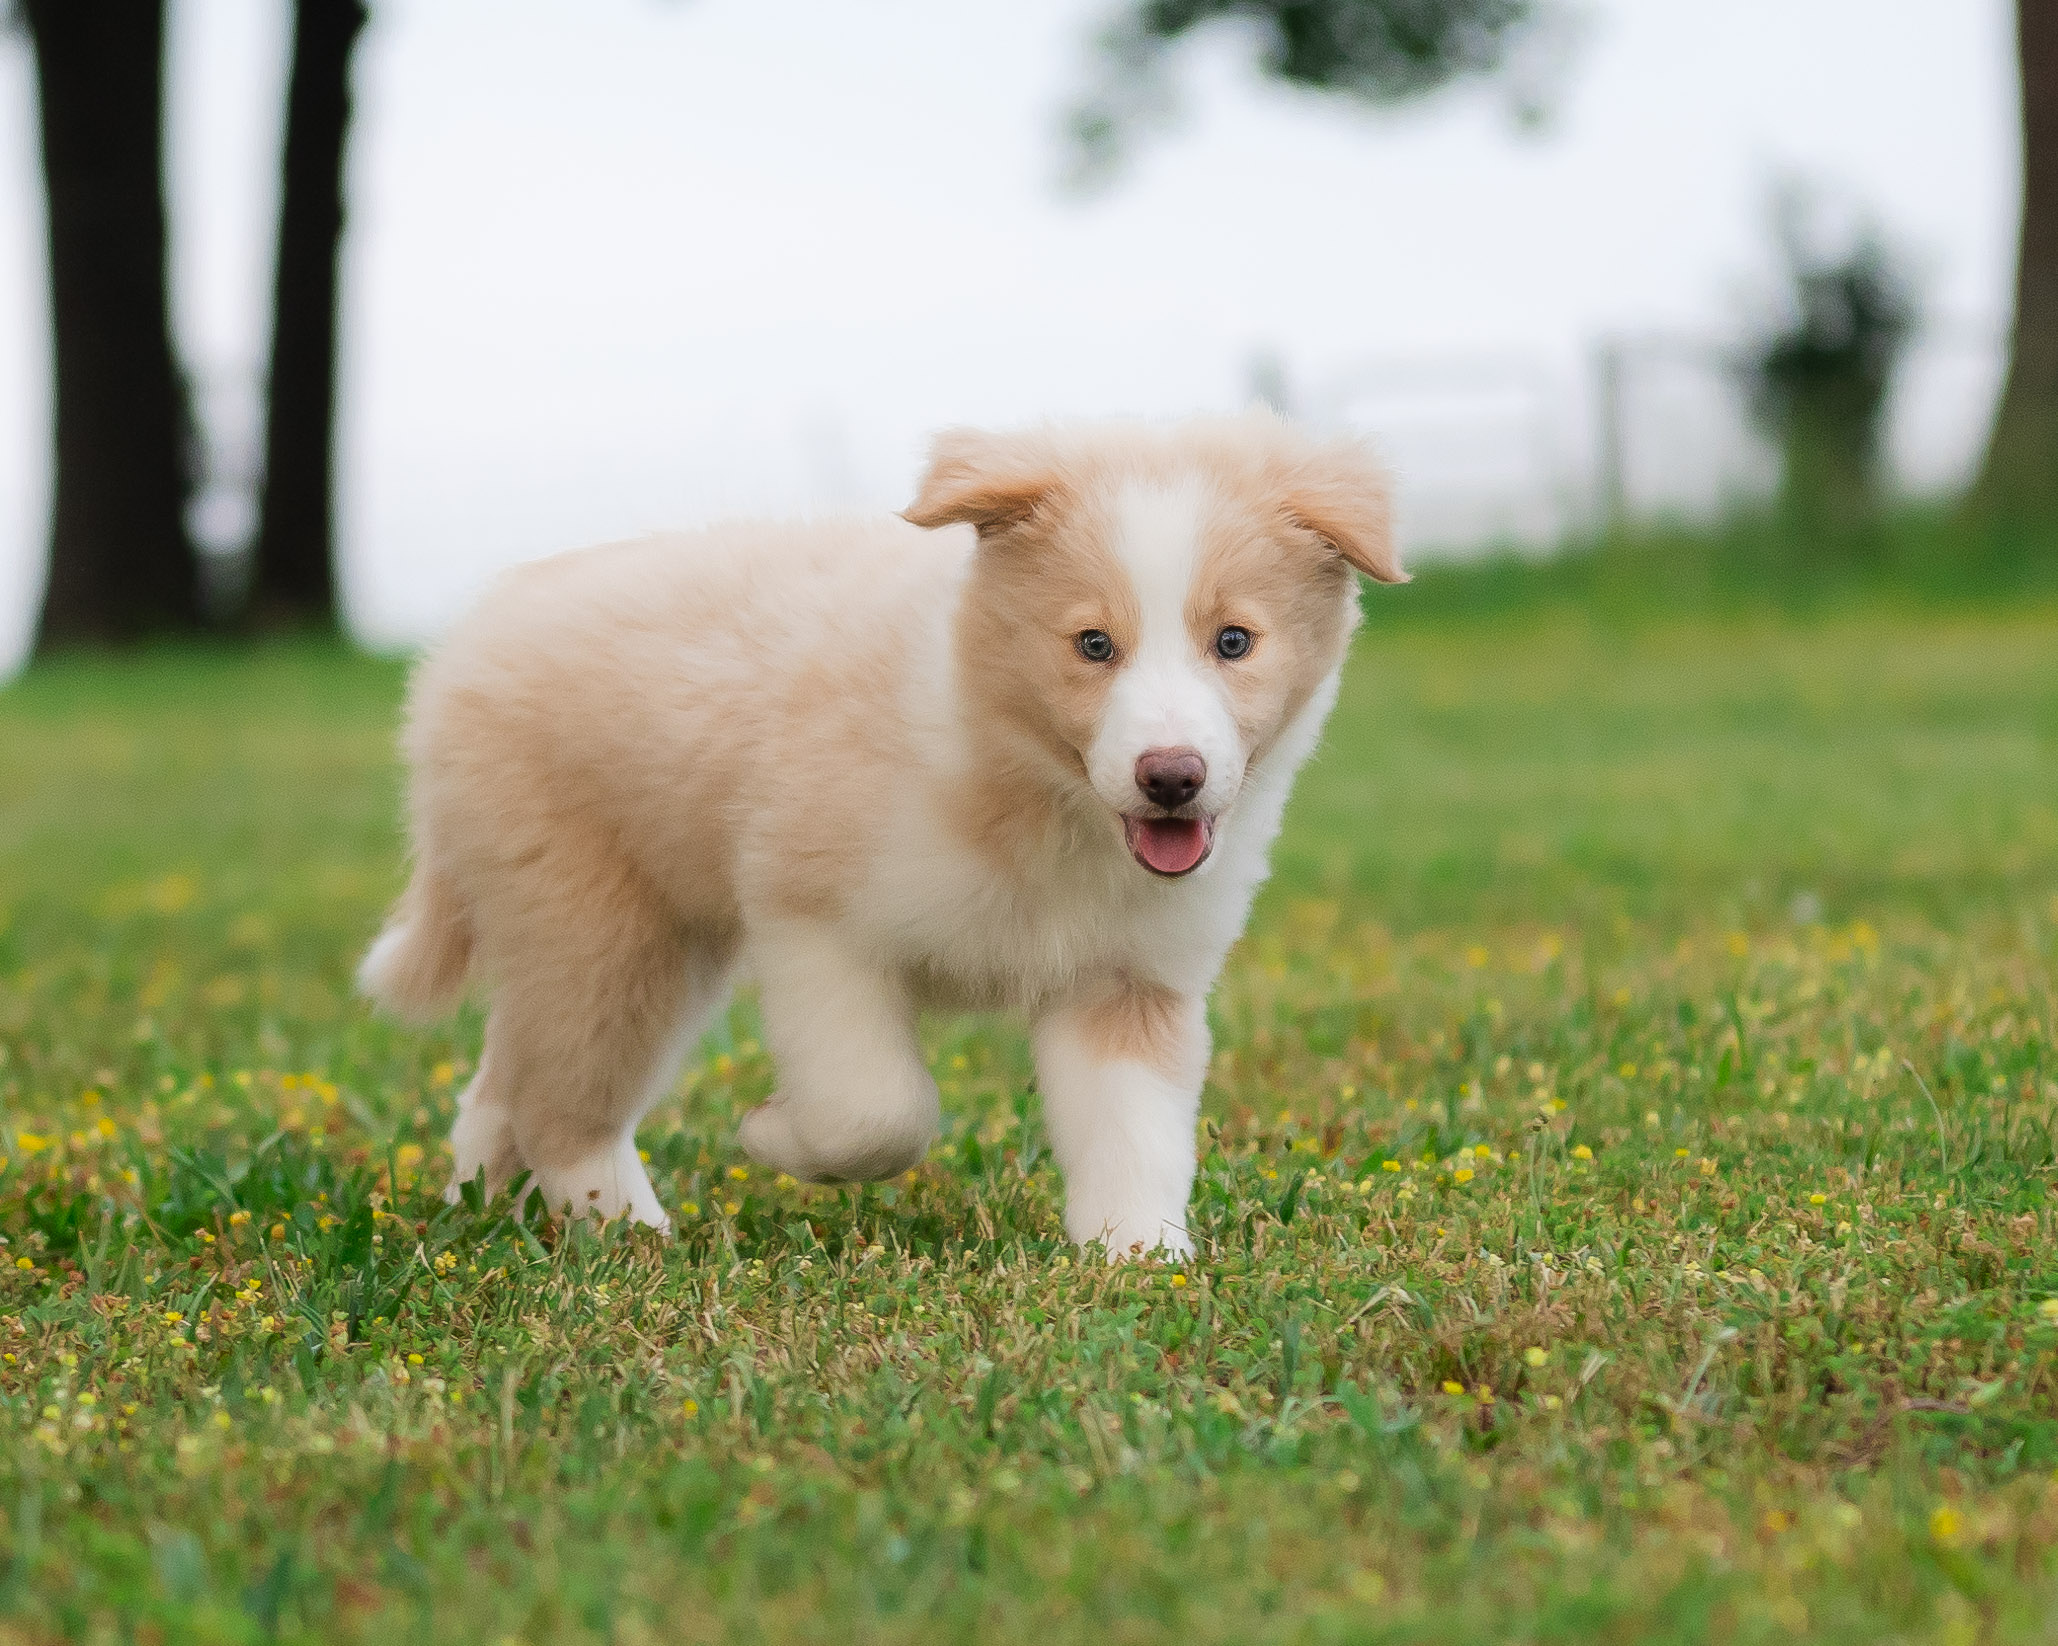 Gold and white Border Collie for sale in Missouri.